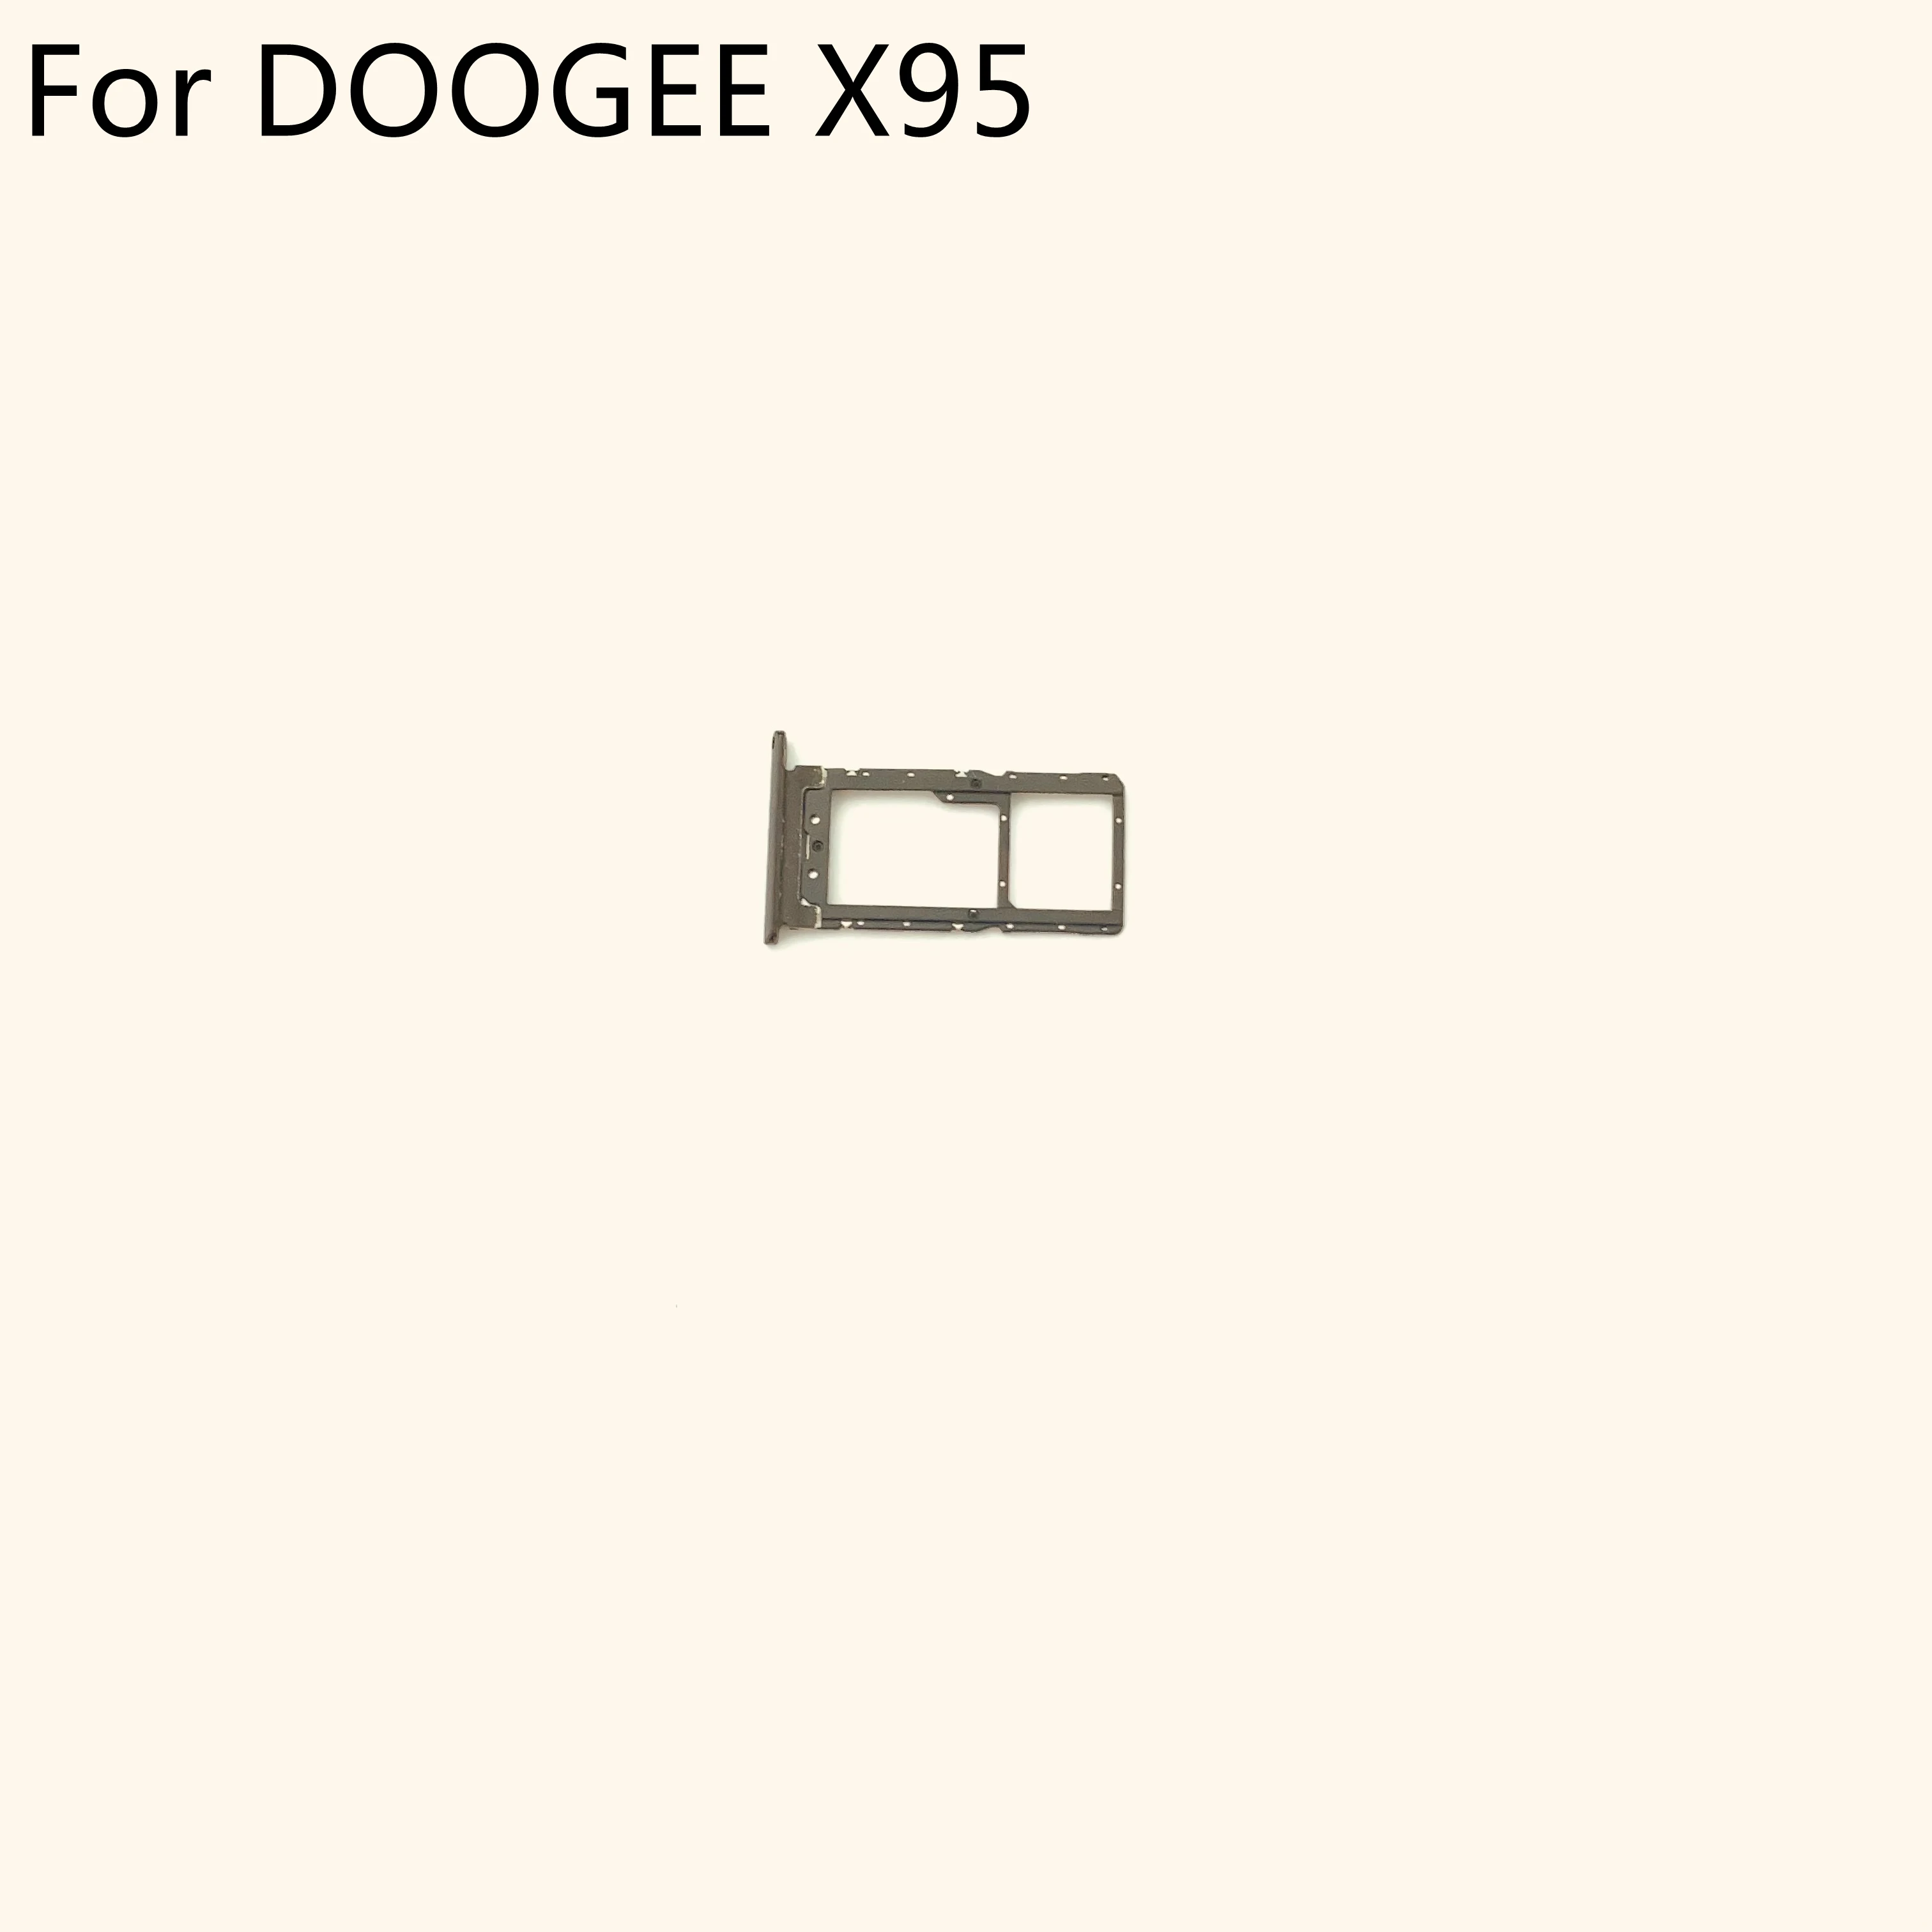 

DOOGEE X95 Sim Card Holder Tray Card Slot For DOOGEE X95 6.52'' MTK6737 Mobile Phone Free Shipping